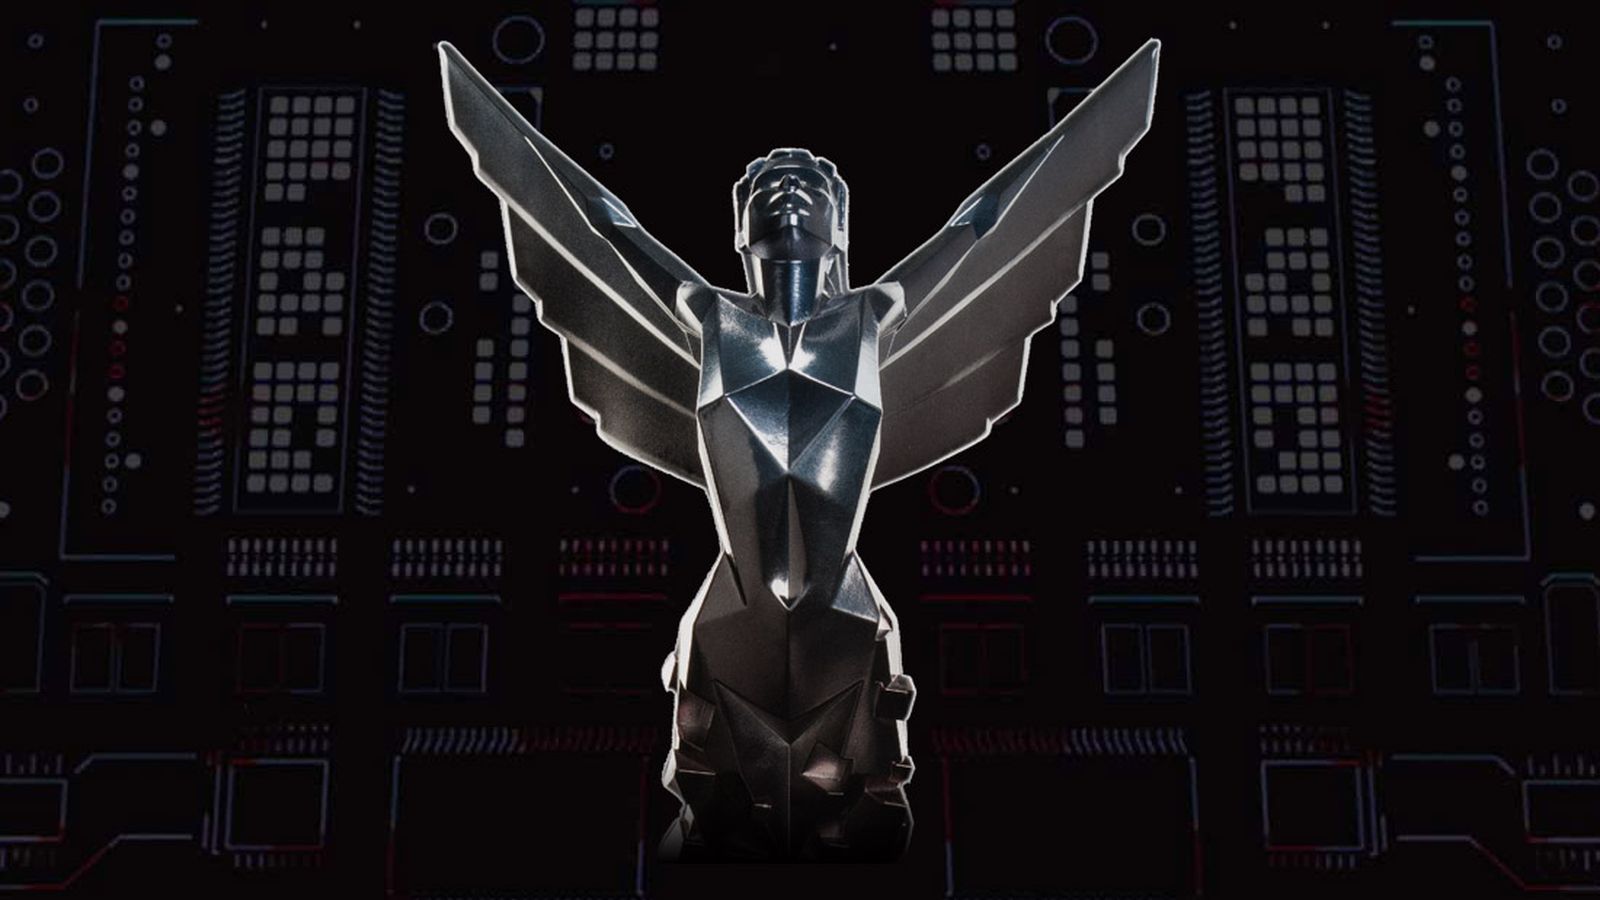 The results of the awards ceremony, The Game Awards 2017